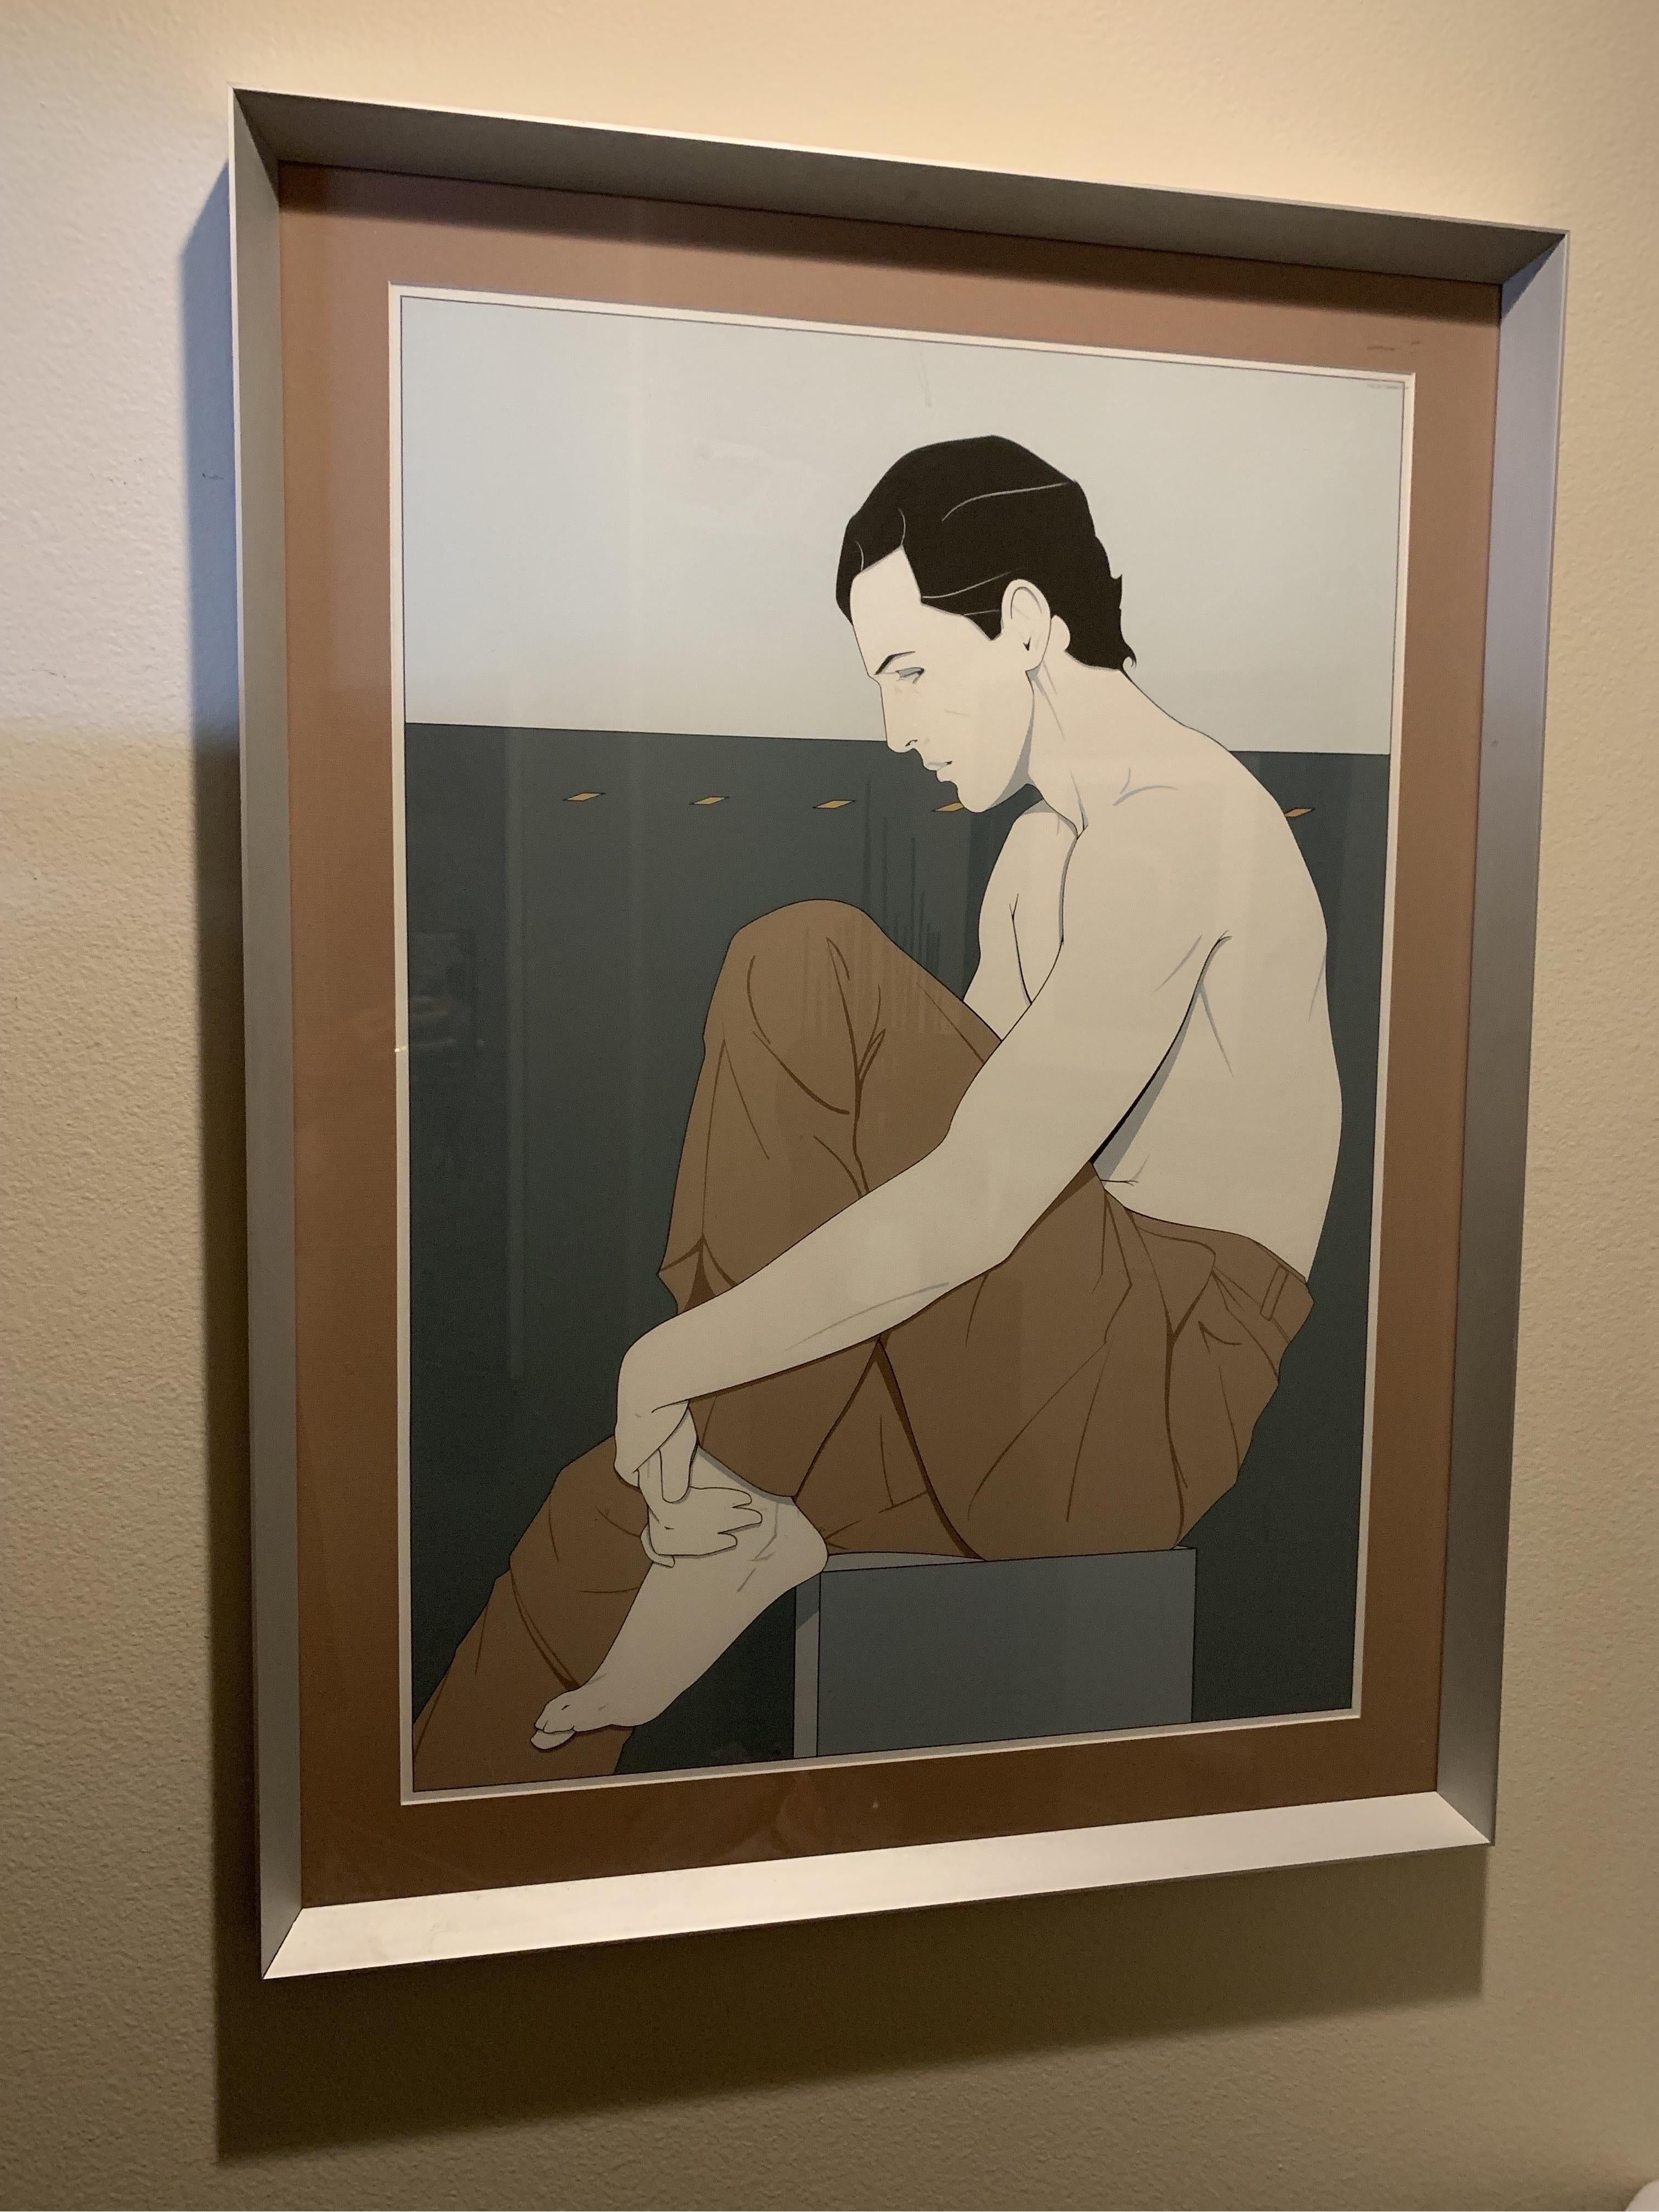 I have owned this Patrick Nagel original silkscreen “Seated Man” since it was released in 1981. I was in fashion college then and Patrick and his beautiful wife were my neighbors. We became friends and I got prints and I made him shirts. He died way